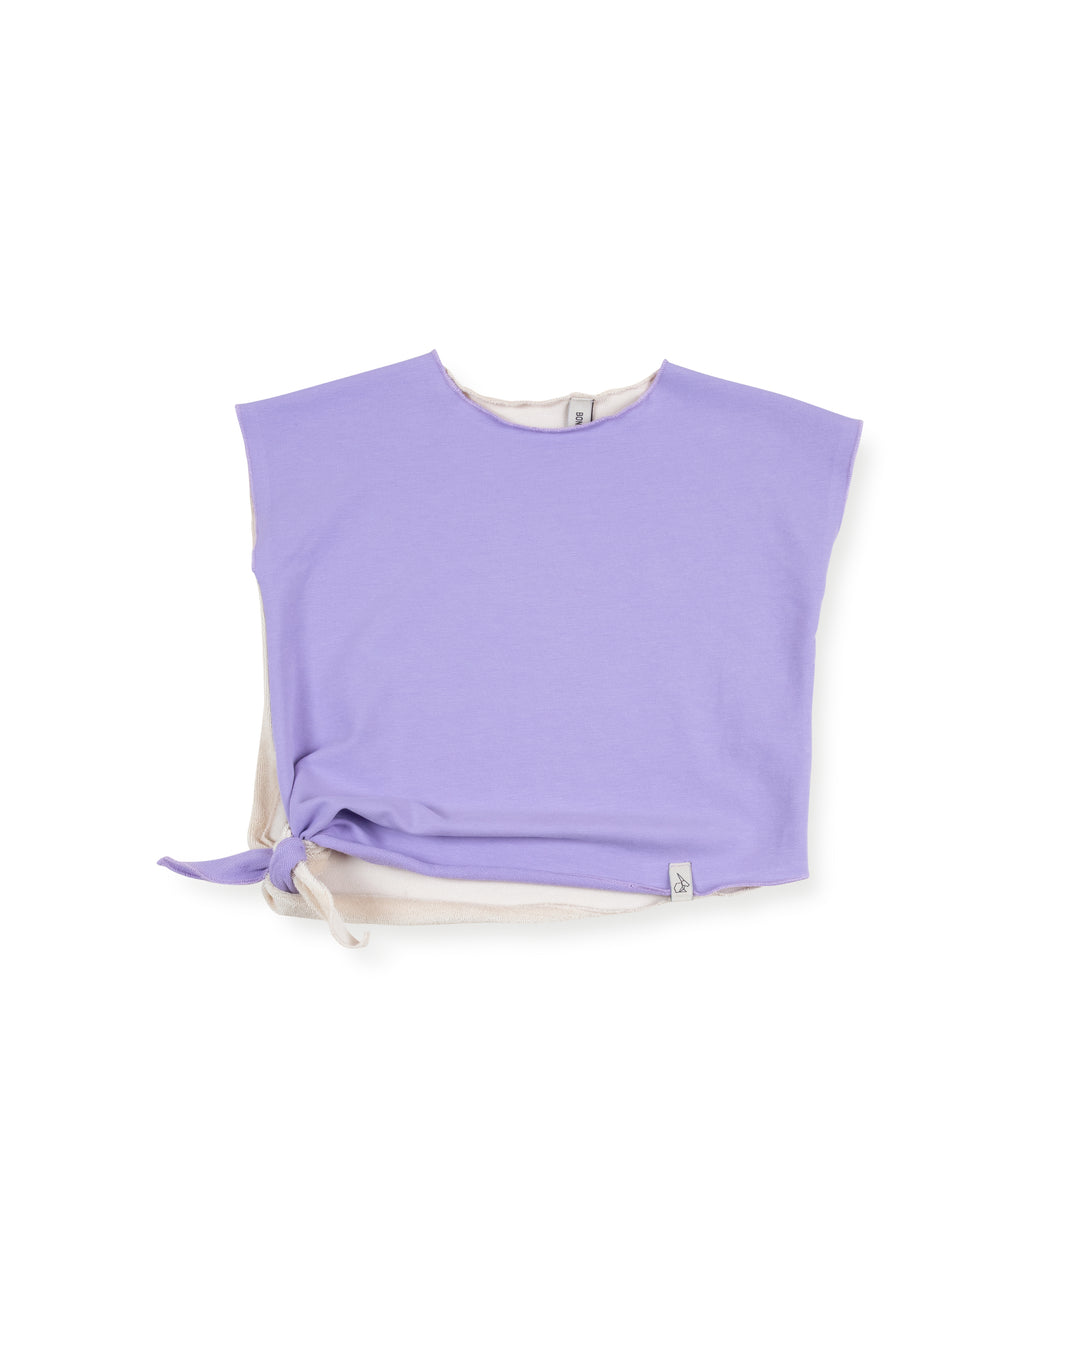 MILLIE KNOTTED T-SHIRT-Lavender/Biscuit